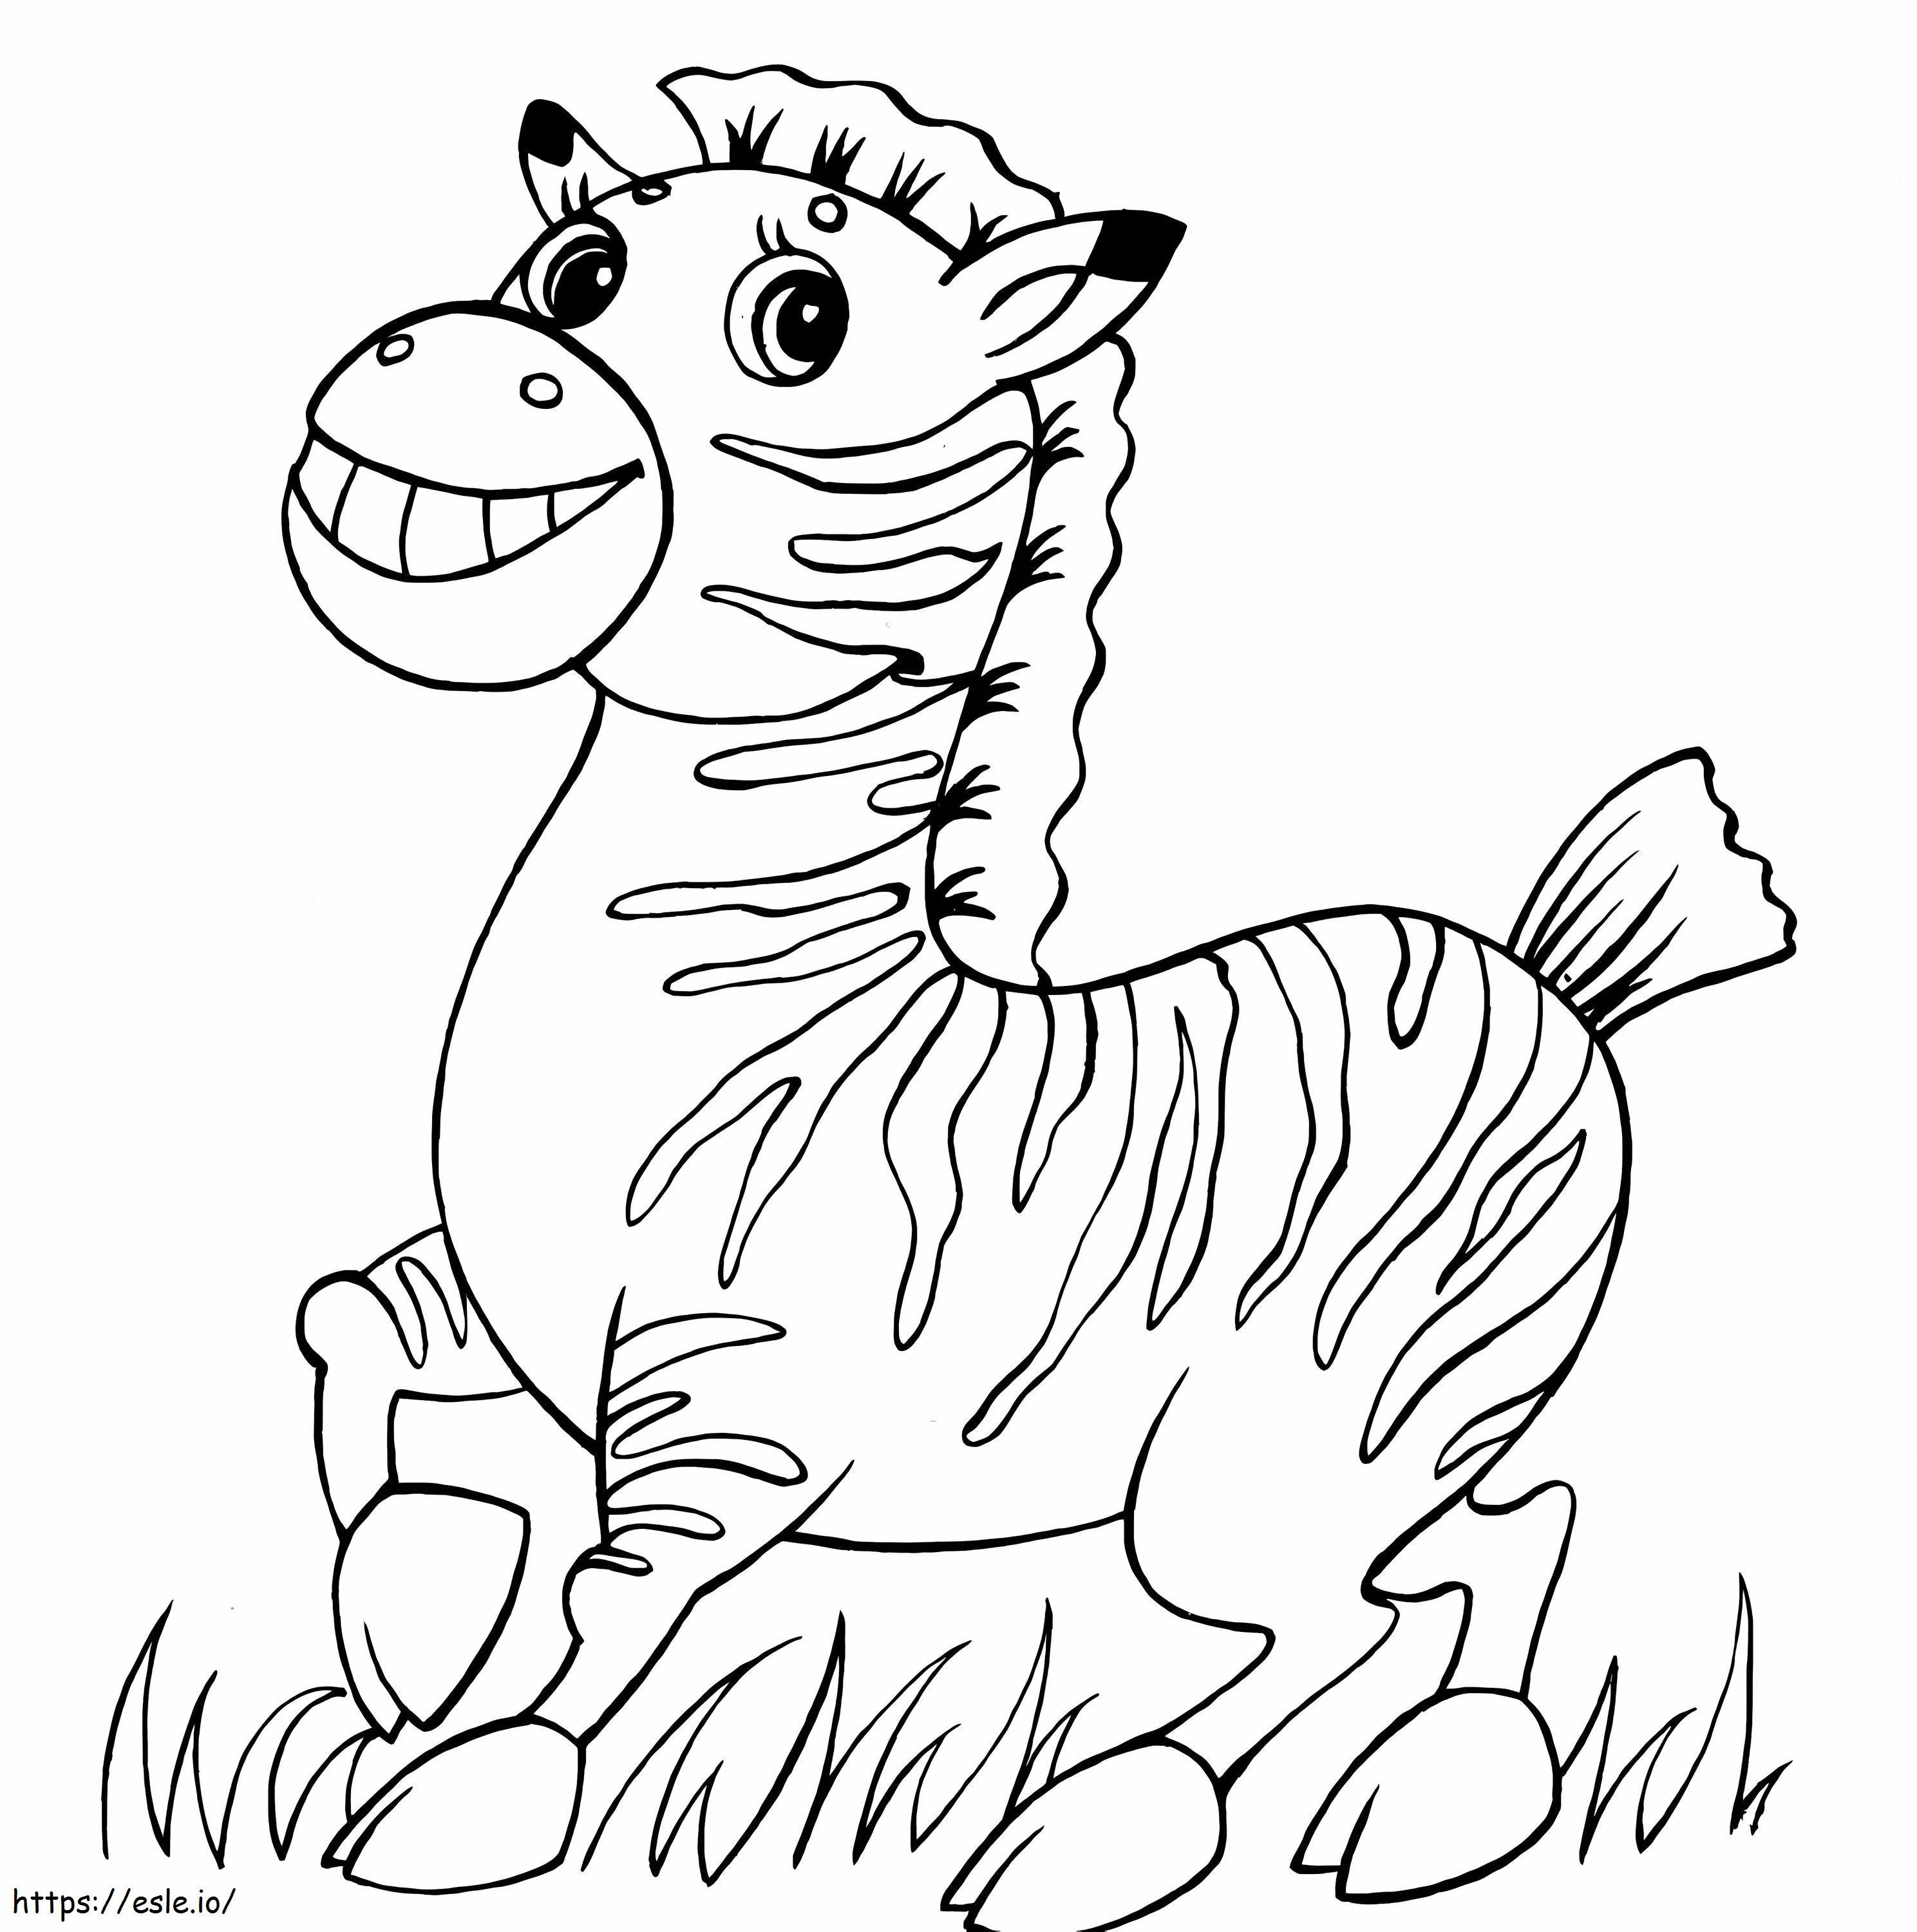 Fun Zebra On Grass coloring page